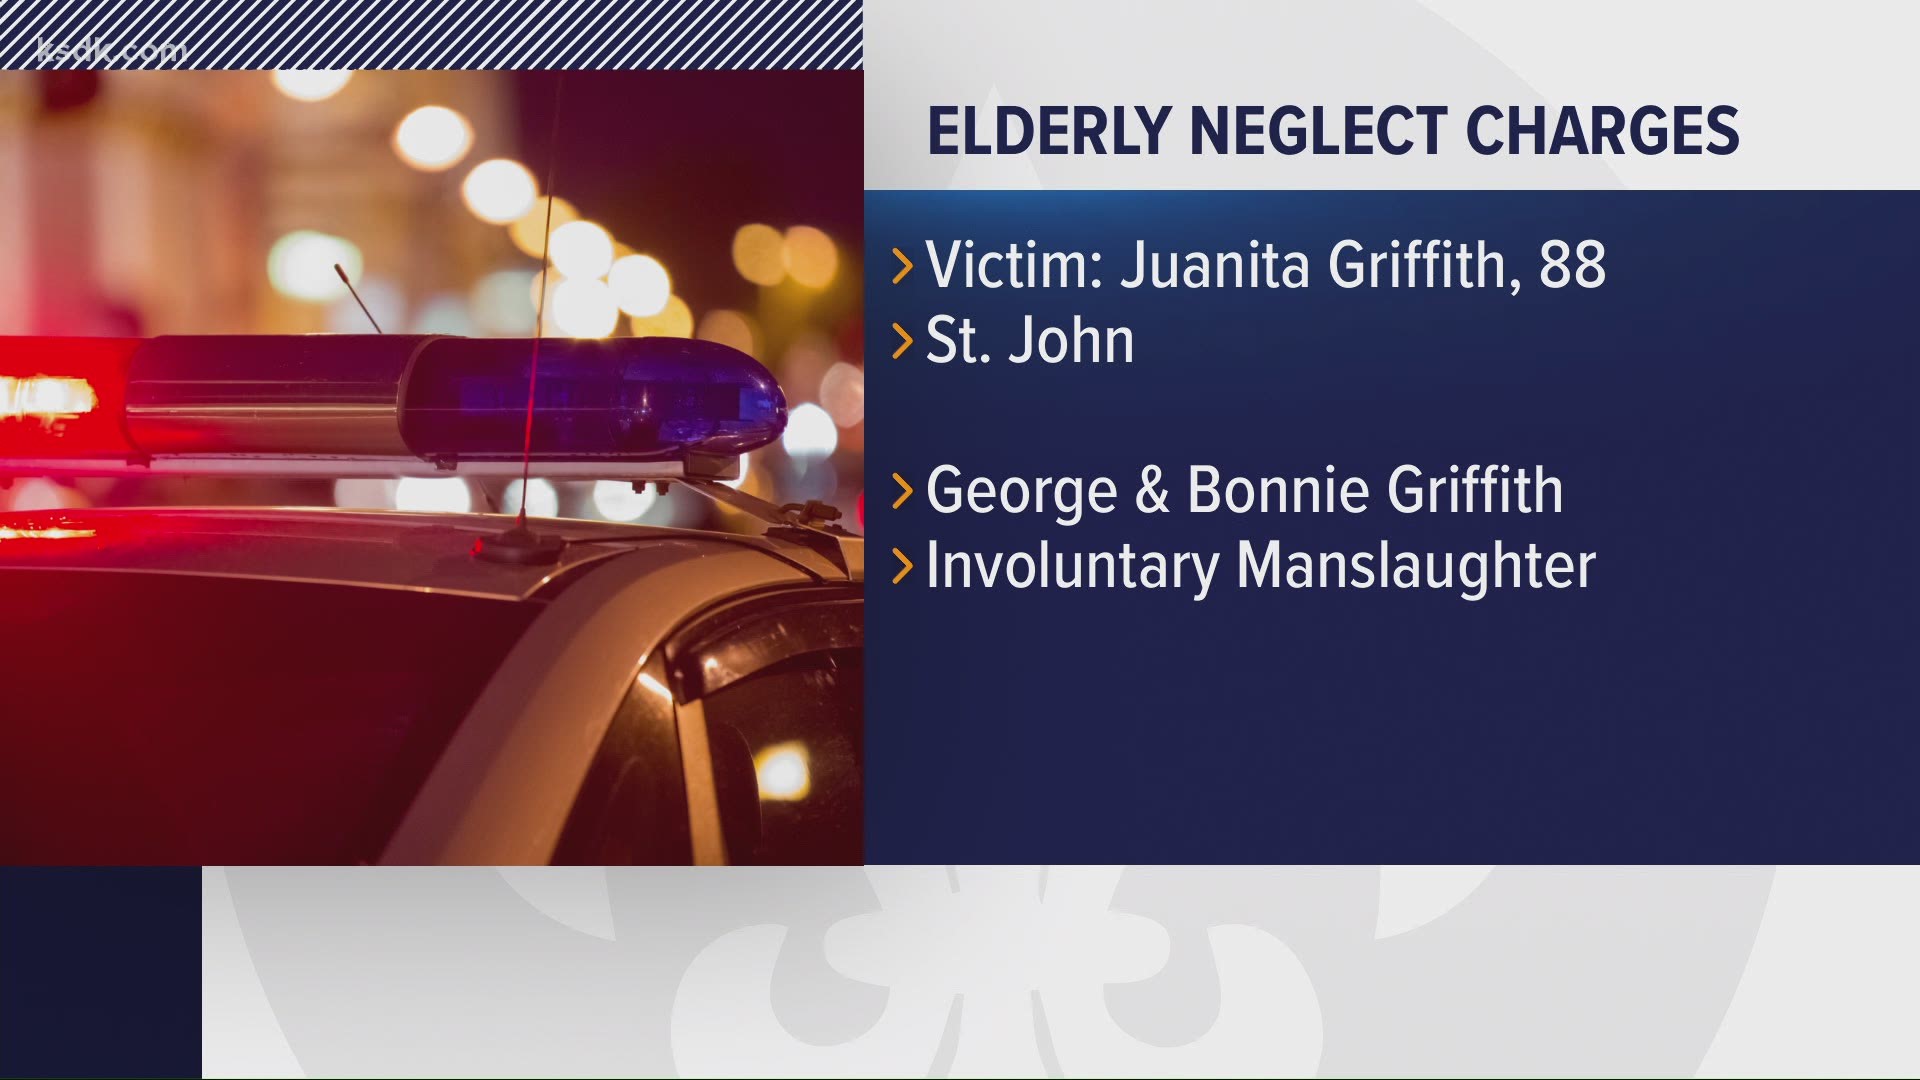 George Griffith and Bonnie Griffith, of St. John, were charged with one count of involuntary manslaughter in connection to the death of George’s mother, Juanita